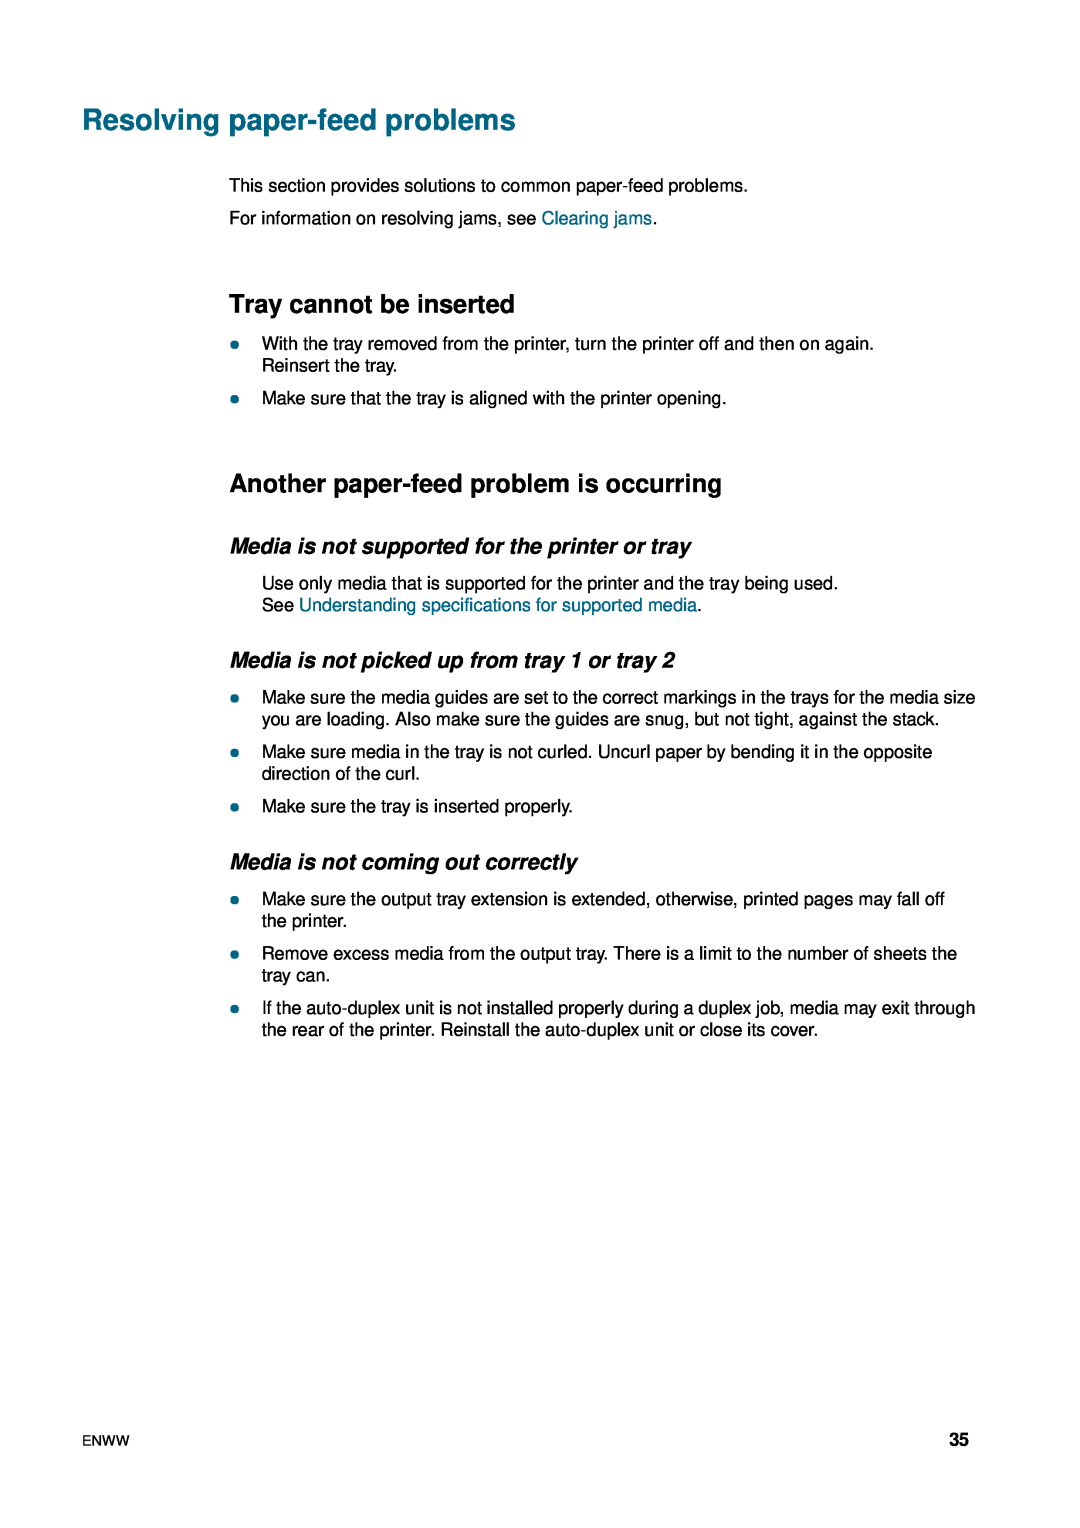 HP 1200 manual Resolving paper-feed problems, Tray cannot be inserted, Another paper-feed problem is occurring 